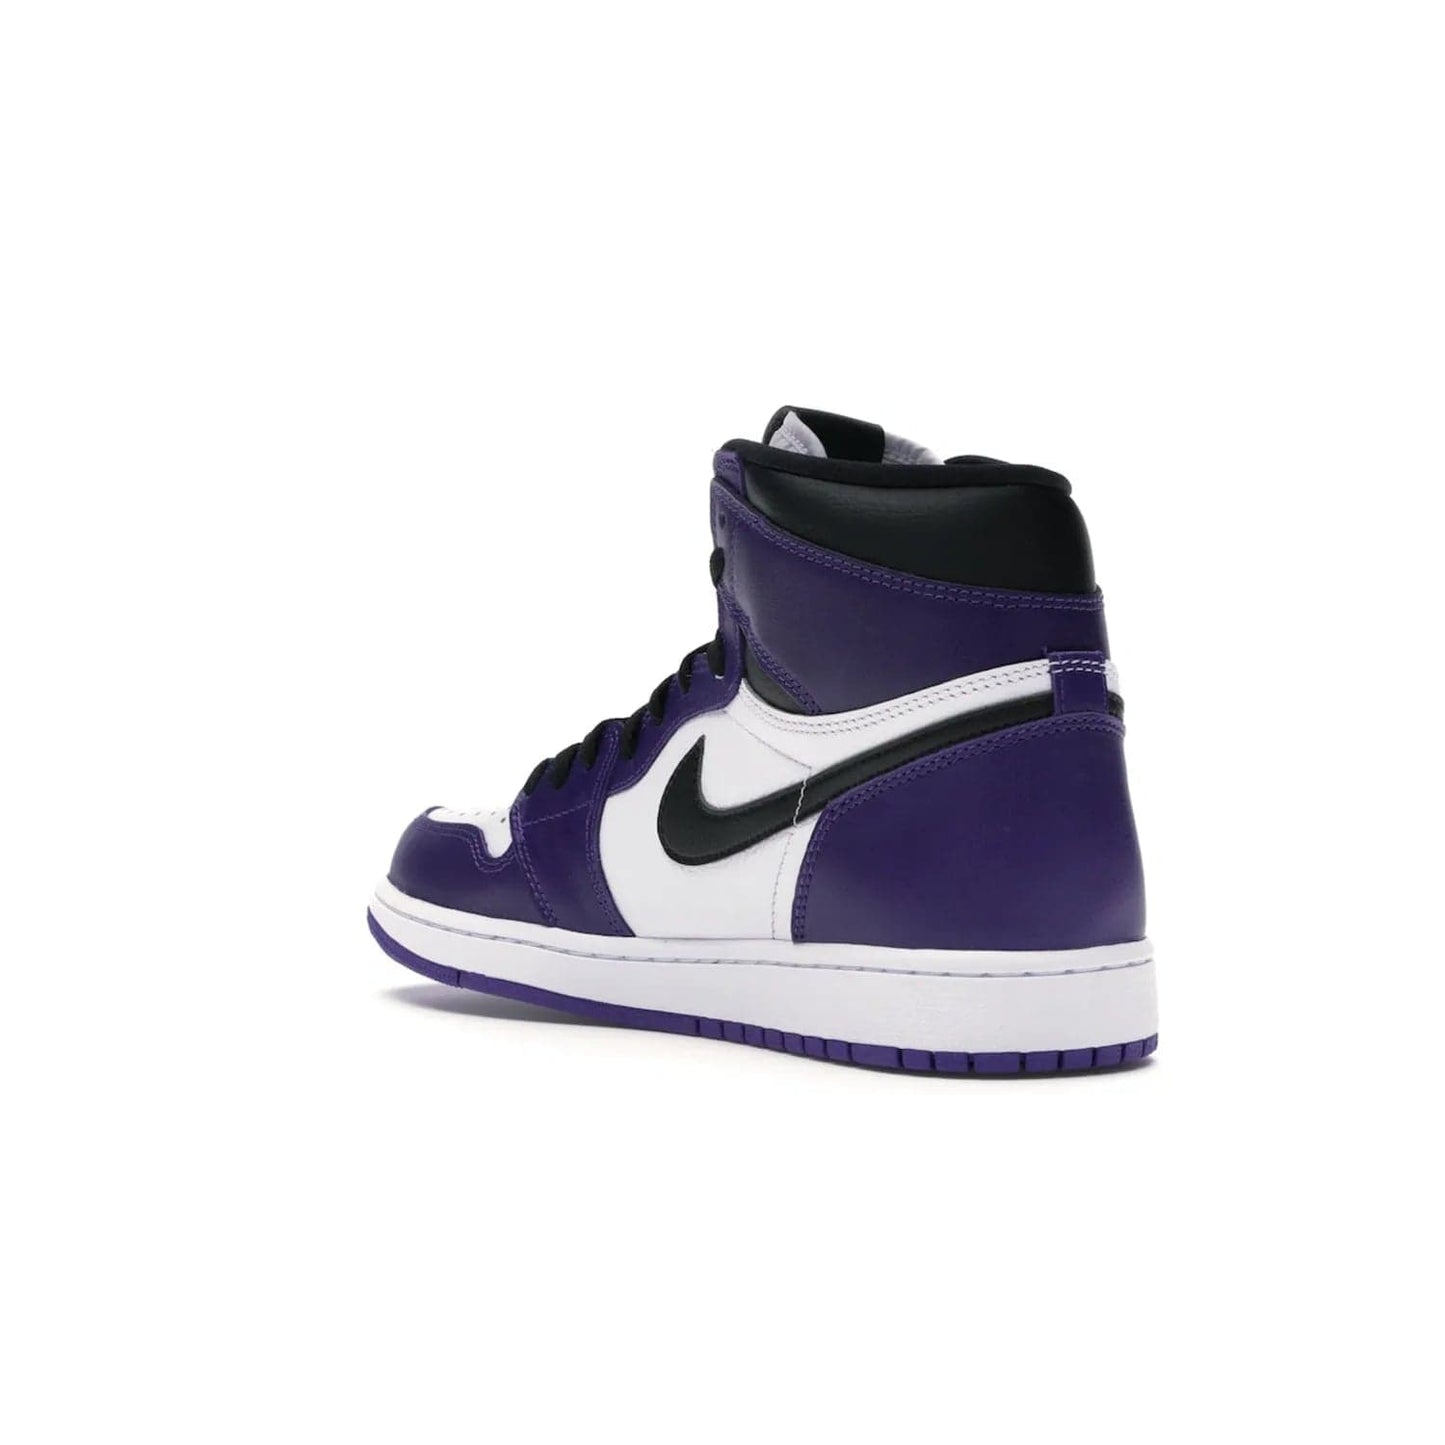 Jordan 1 Retro High Court Purple White - Image 24 - Only at www.BallersClubKickz.com - Grab the classic Jordan 1 Retro High Court Purple White and add major flavor to your collection. White leather upper with Court Purple overlays and Swoosh logo. White midsole and purple outsole. Get yours and rep your Jordan Brand.